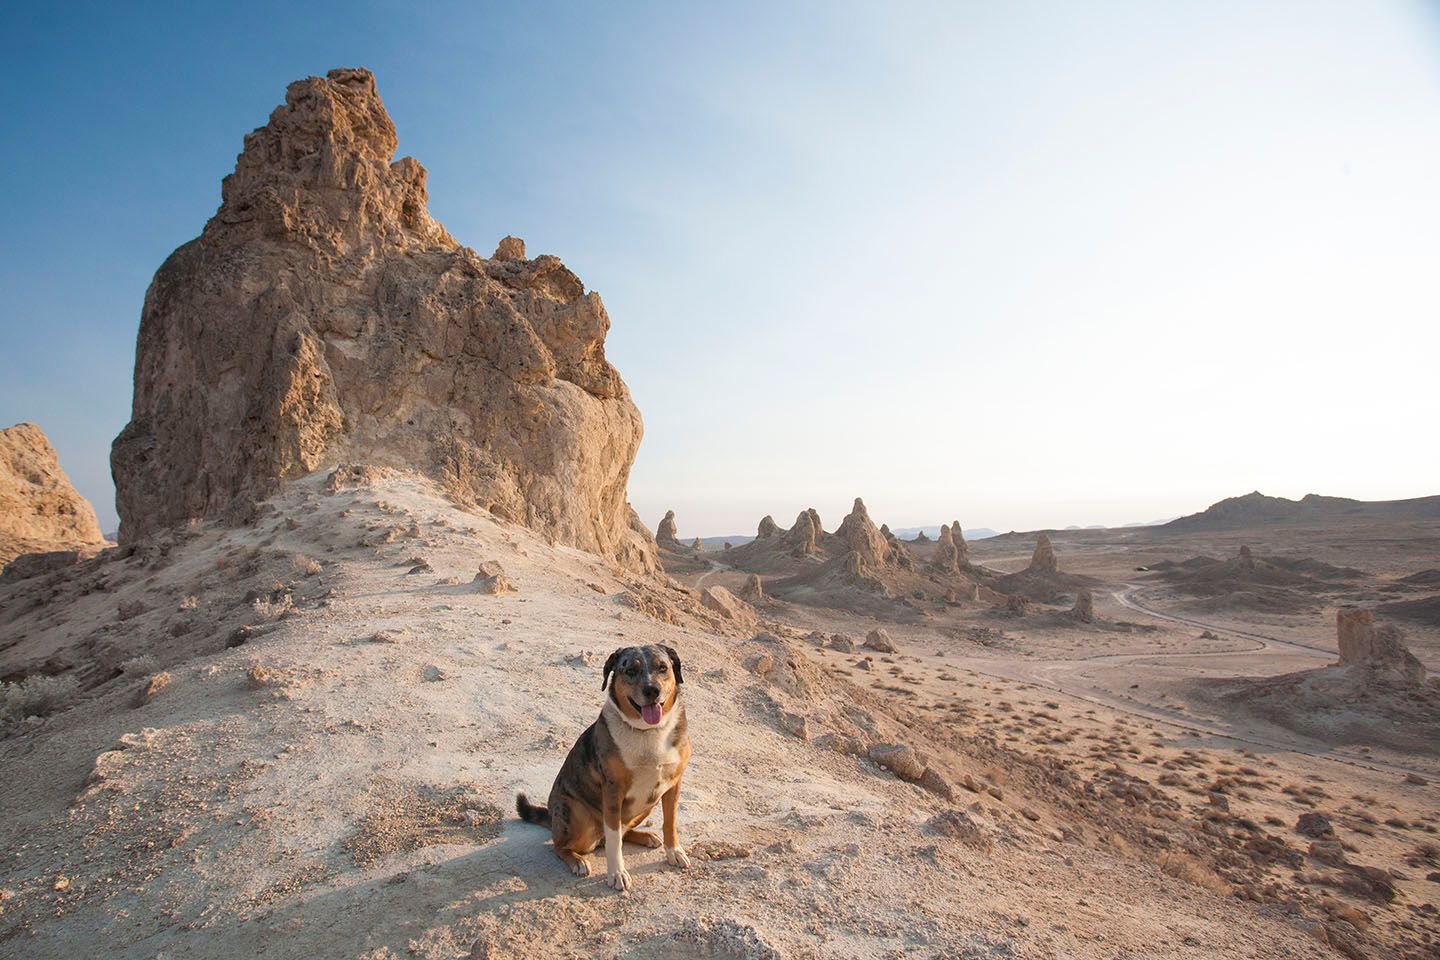 Dog-Friendly Adventures along US 395 in California